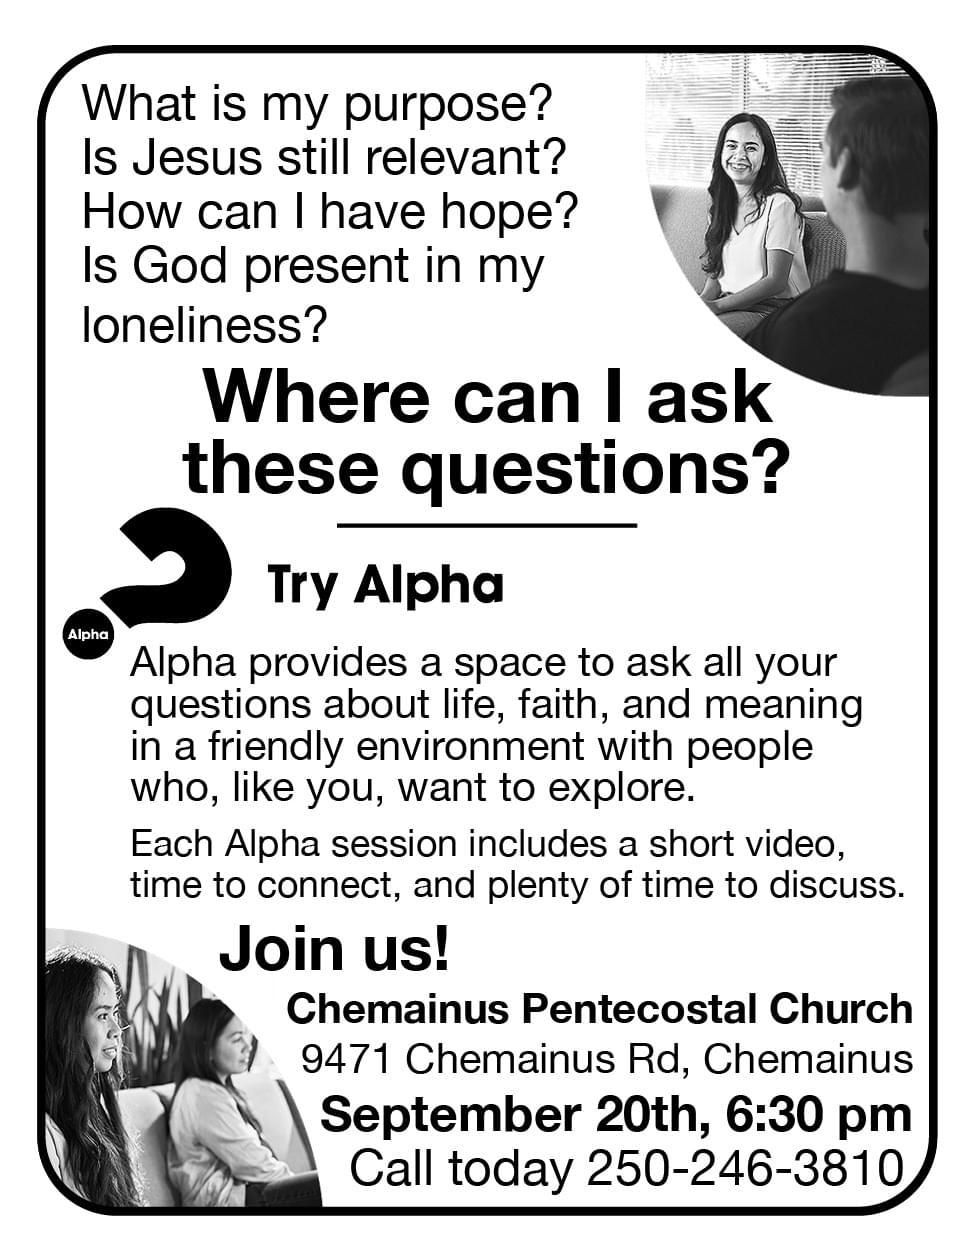 Try Alpha at Chemainus Penetecostal Church Ad in Coffee News